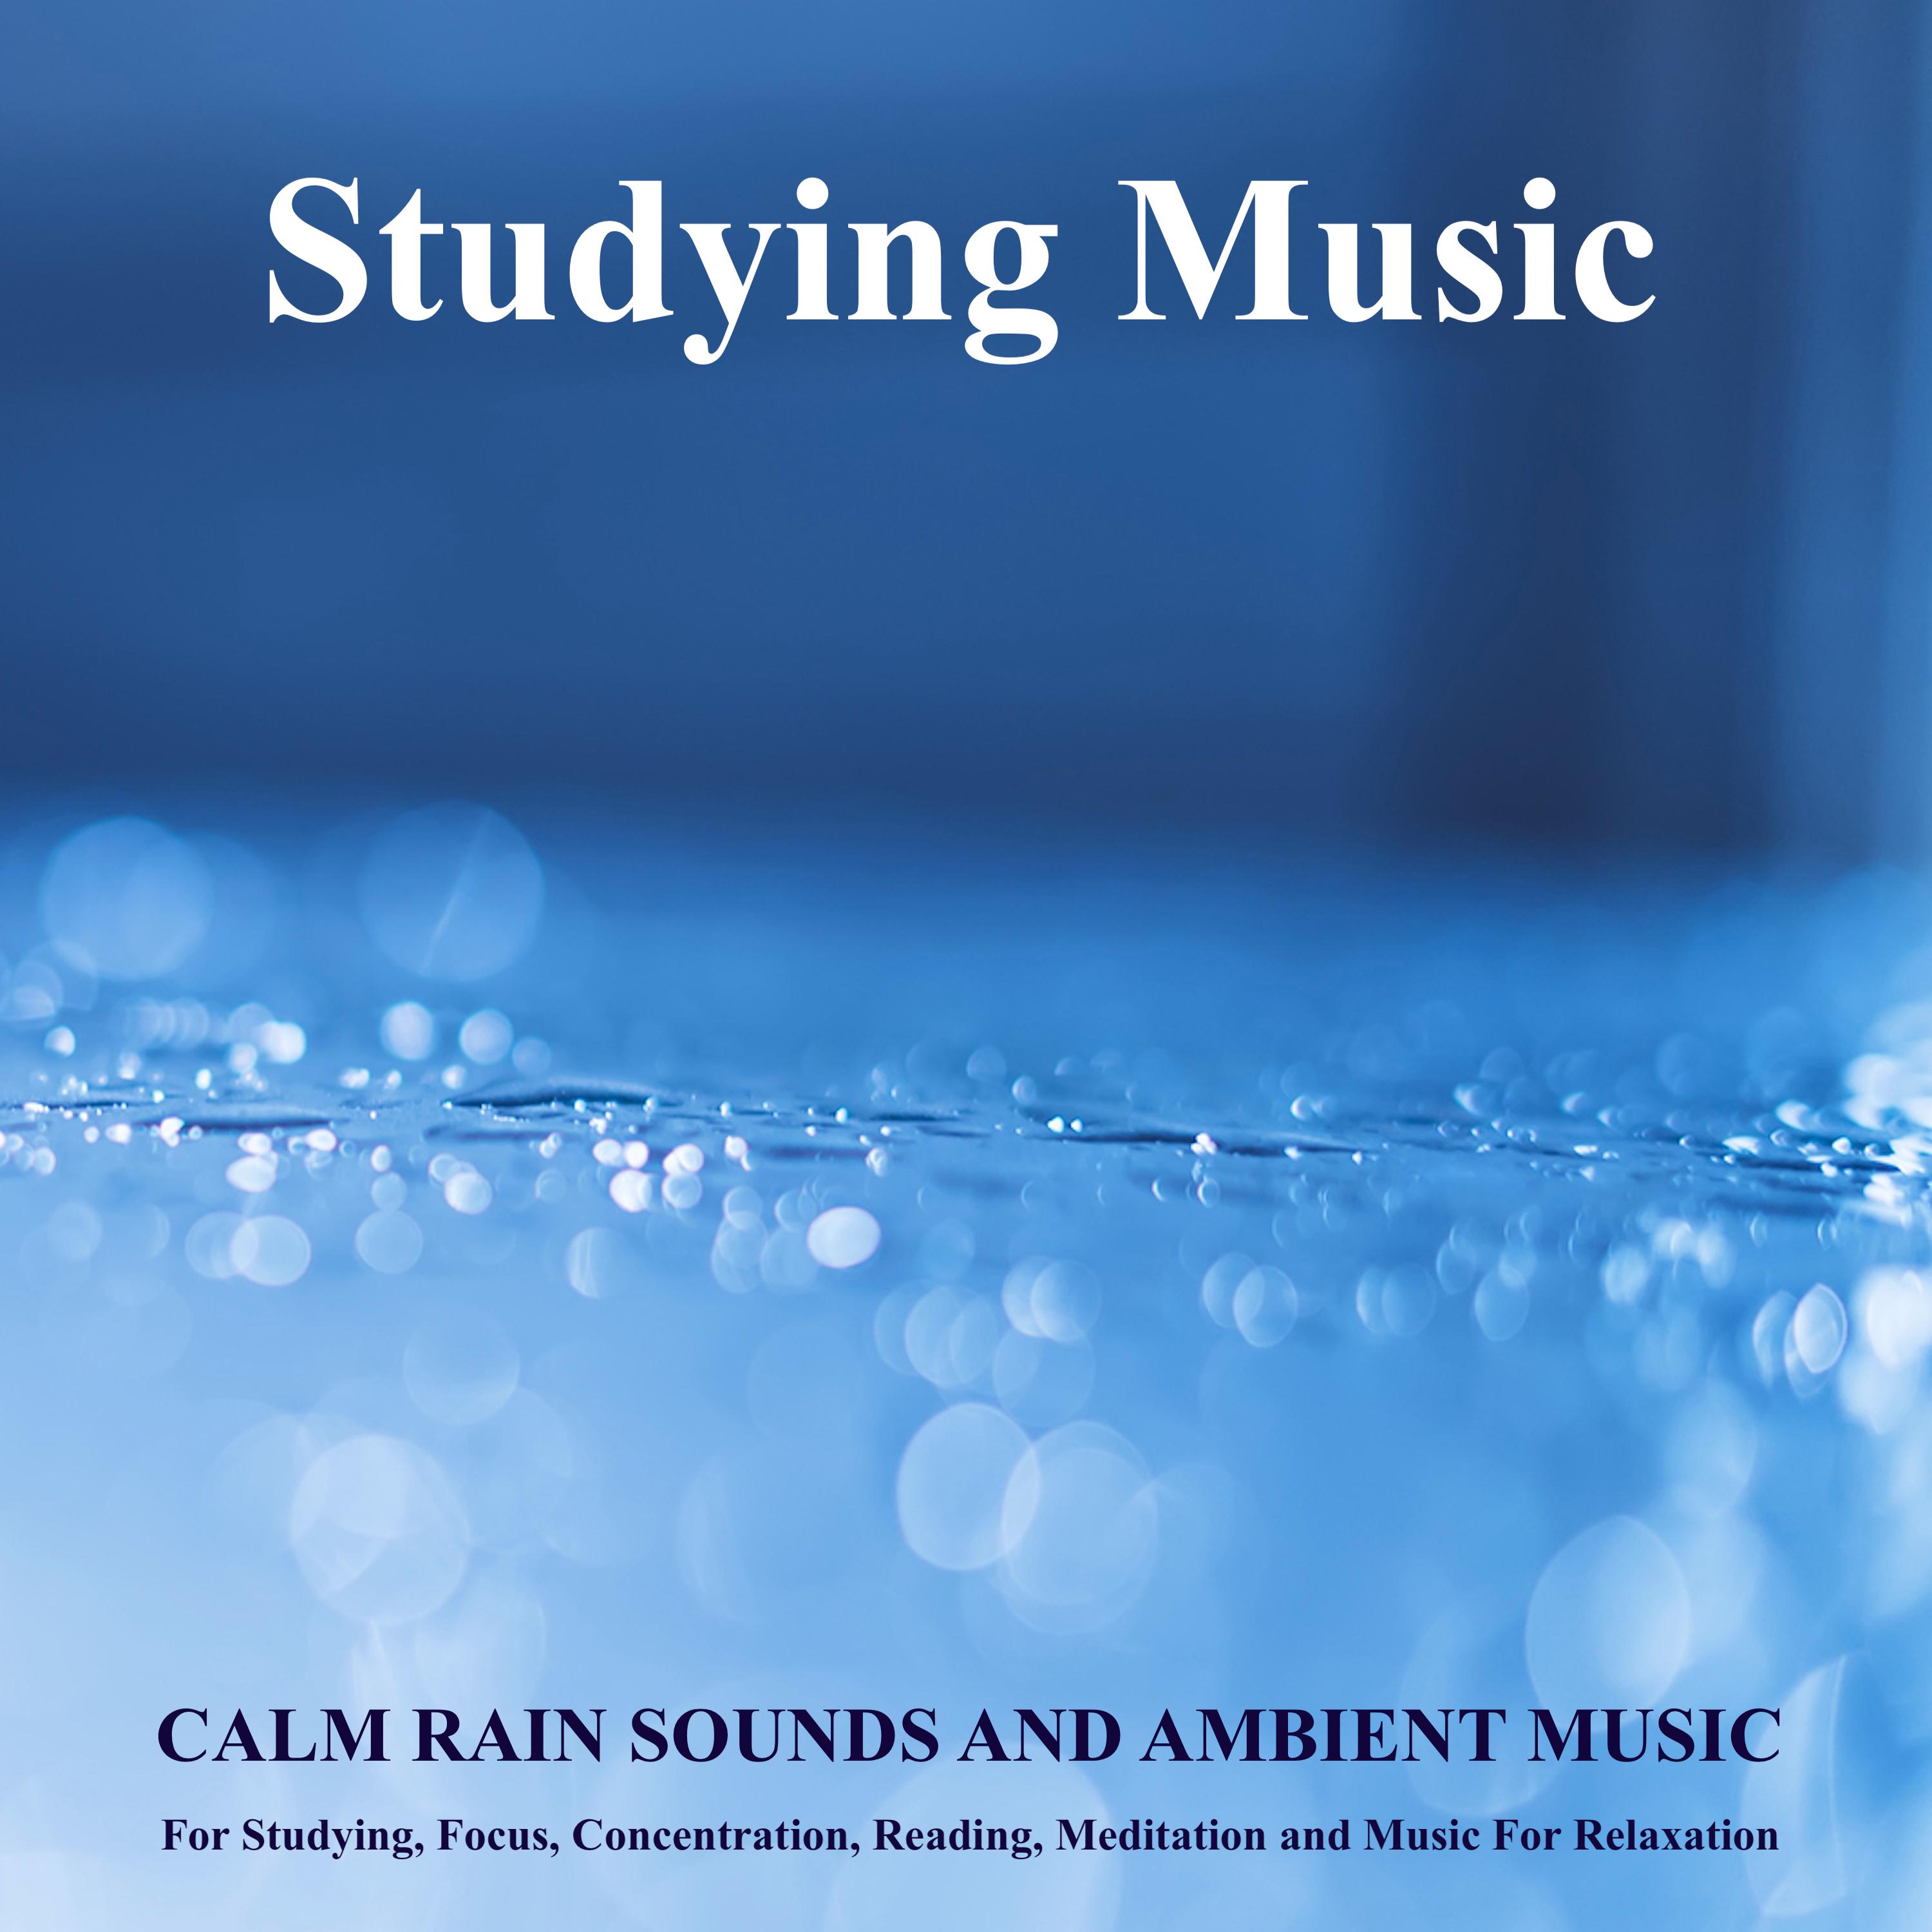 Studying Music: Calm Rain Sounds and Ambient Music For Studying, Focus, Concentration, Reading, Meditation and Music For Relaxation